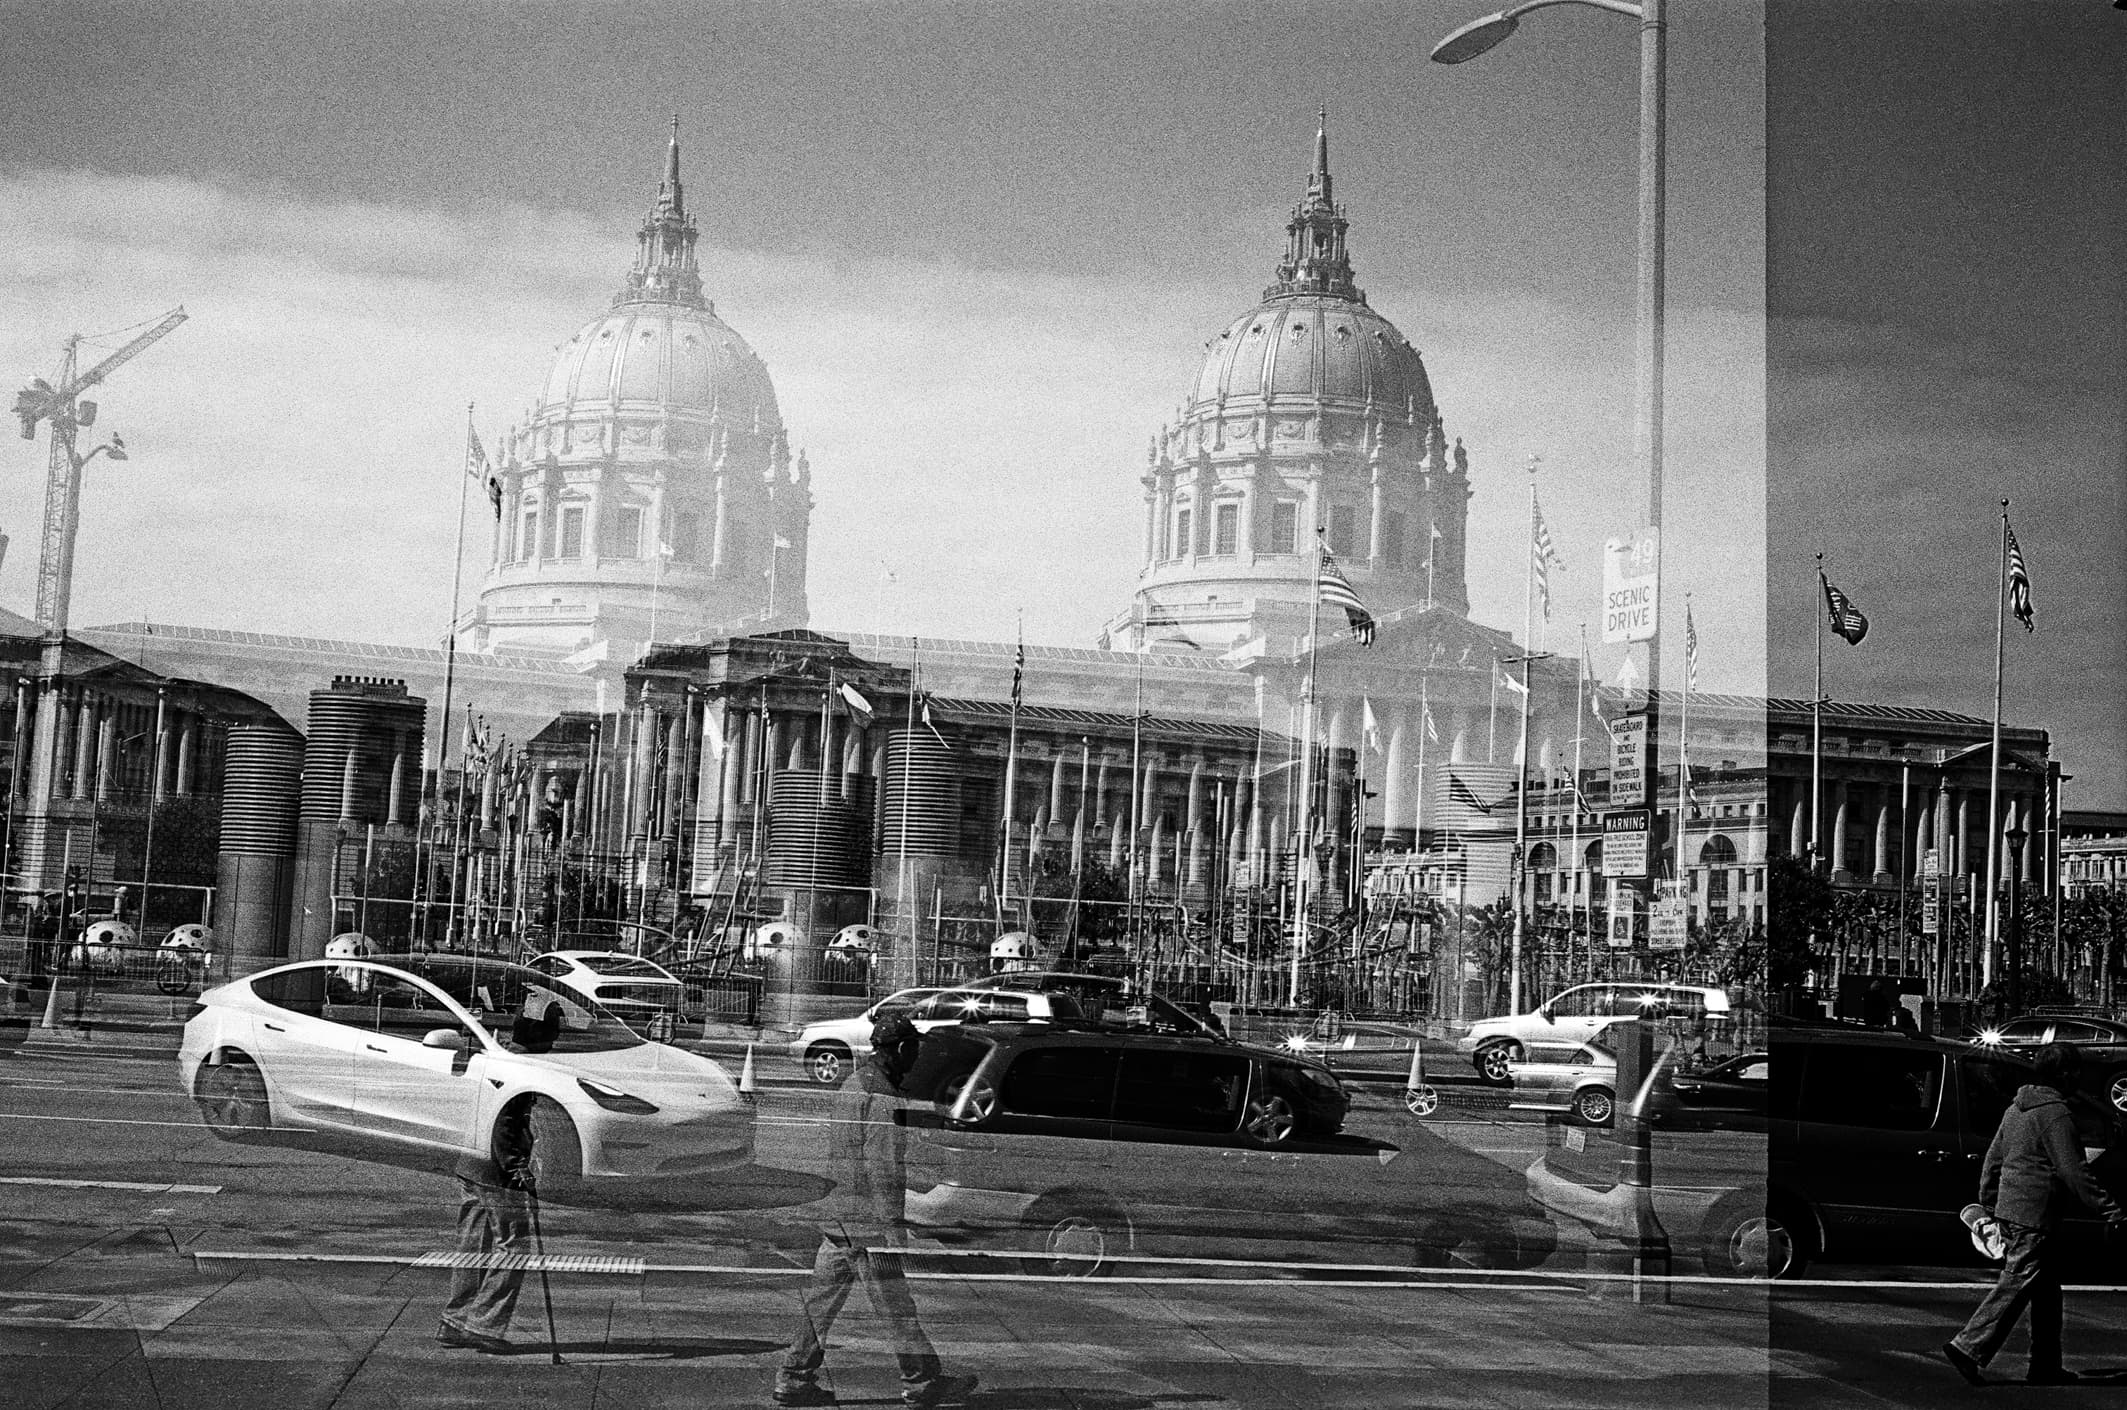 a scan of a black and white film negative of san francisco city hall with a double exposure